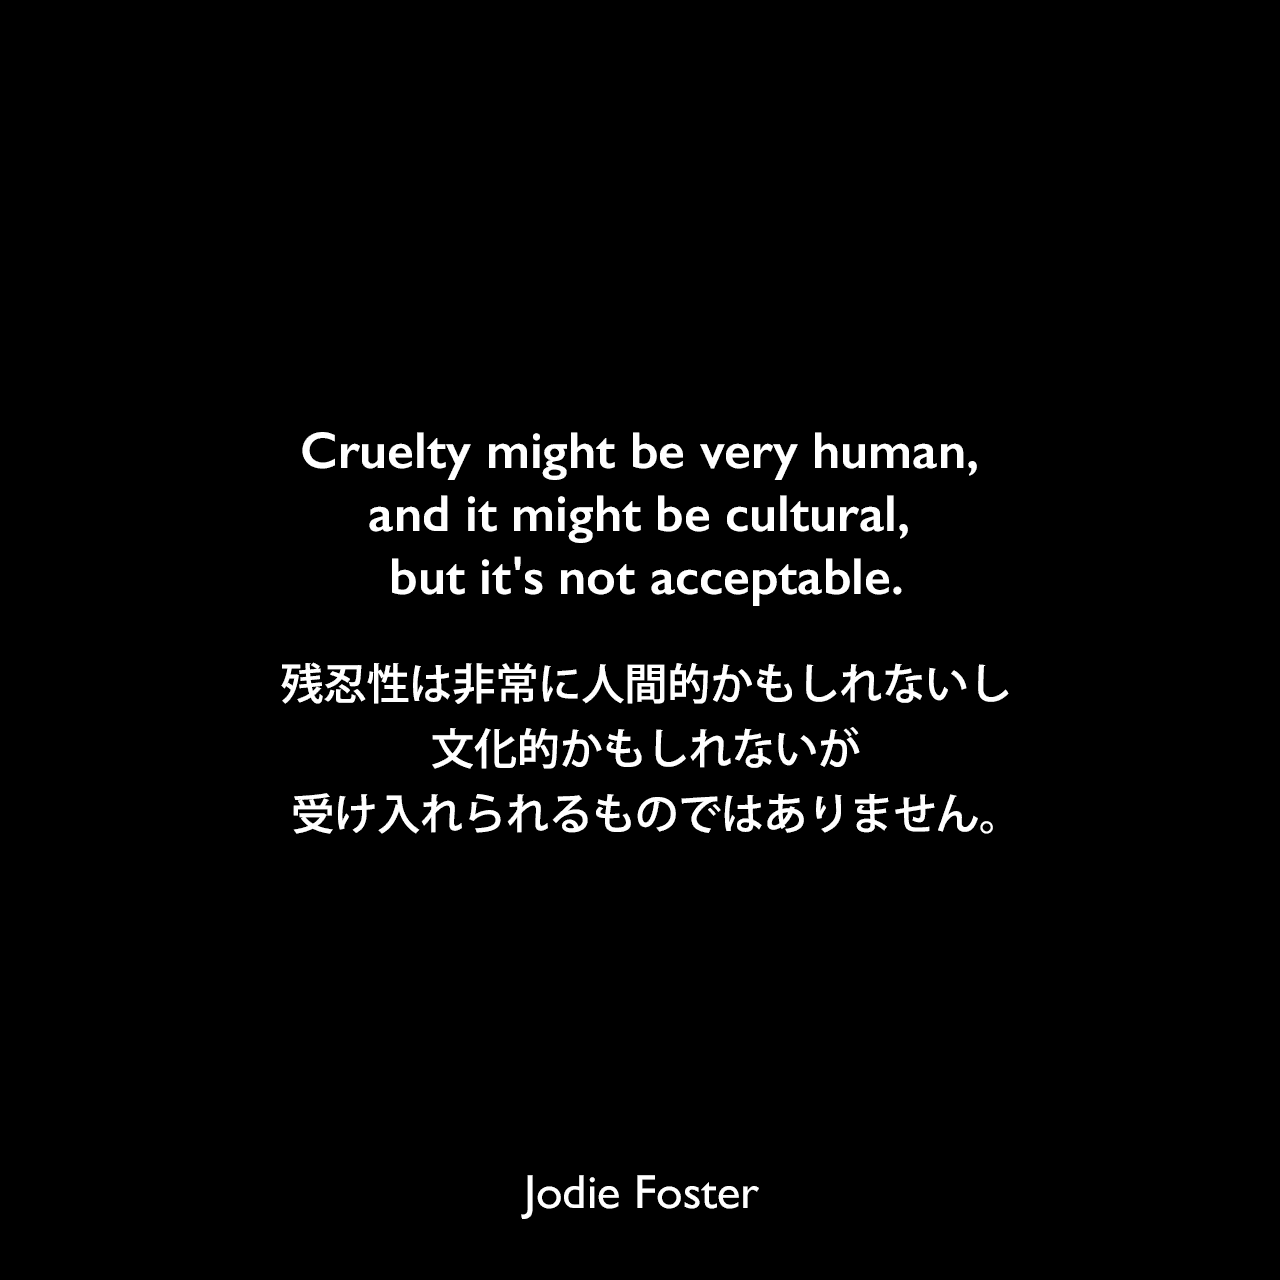 Cruelty might be very human, and it might be cultural, but it's not acceptable.残忍性は非常に人間的かもしれないし、文化的かもしれないが、受け入れられるものではありません。Jodie Foster